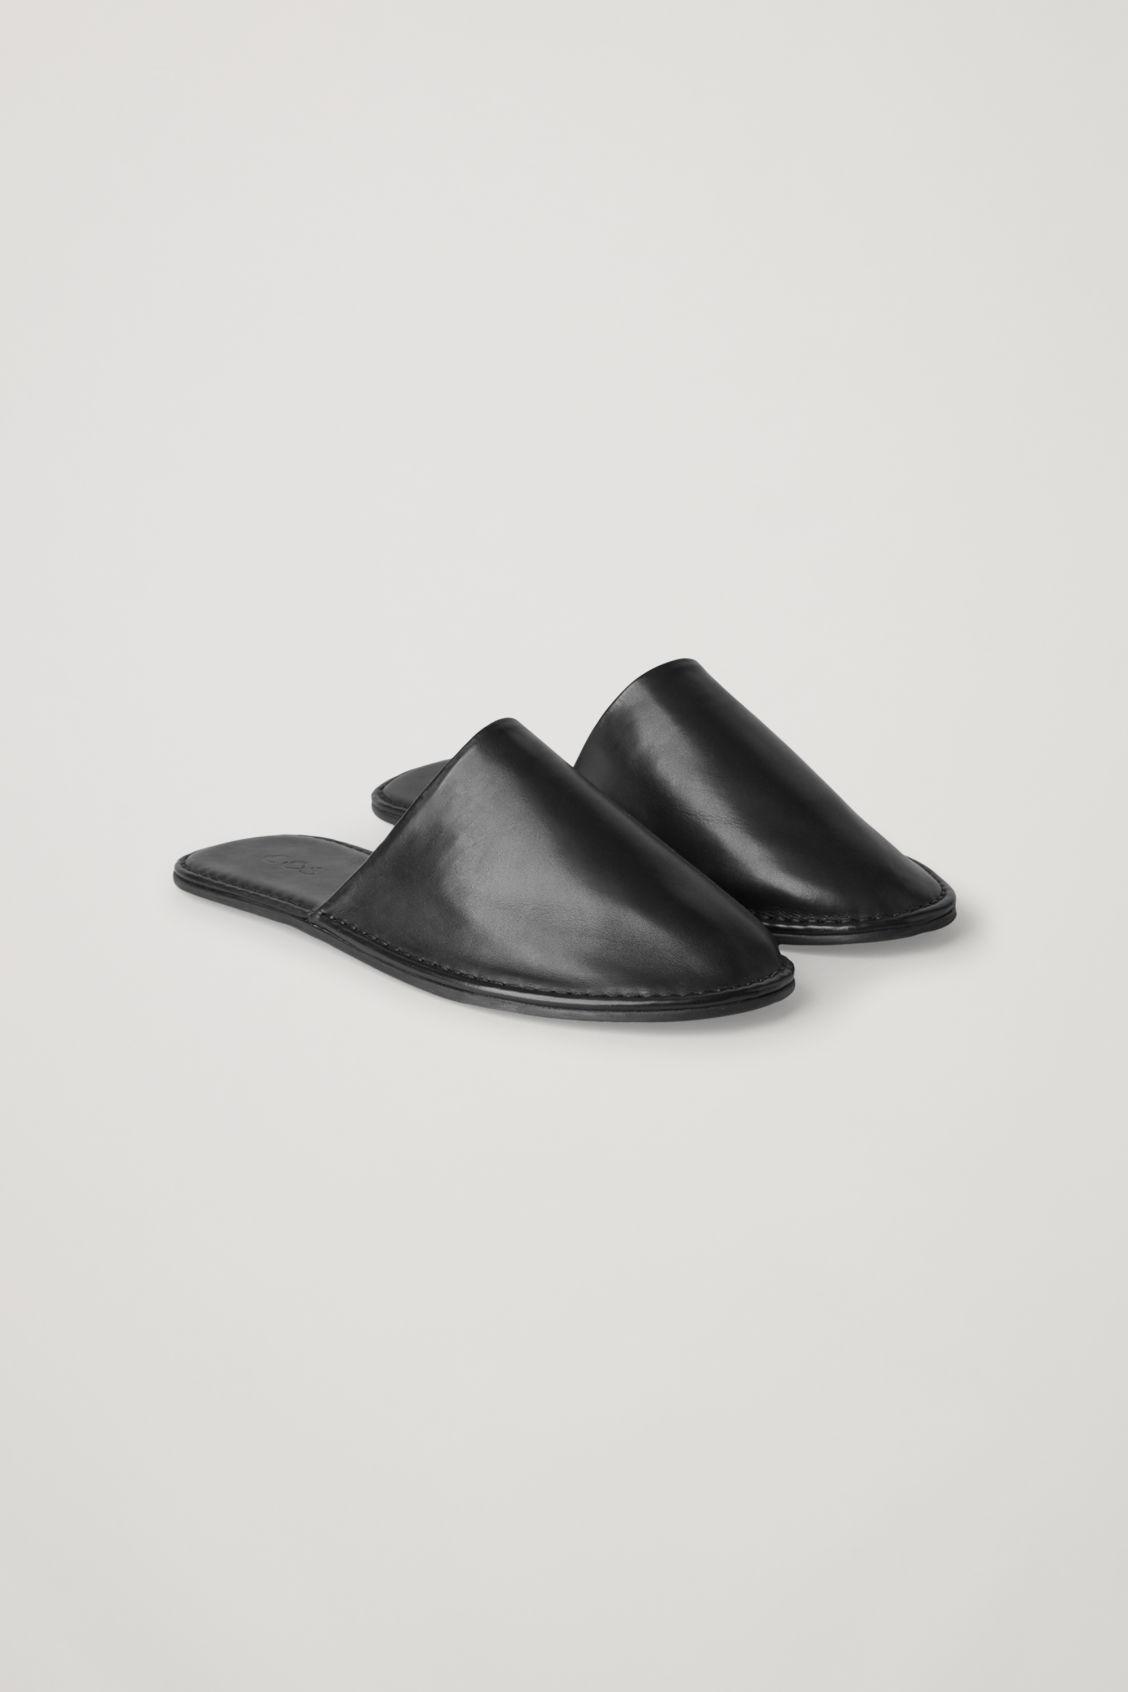 COS Nappa Leather Slippers in Black for Men - Lyst